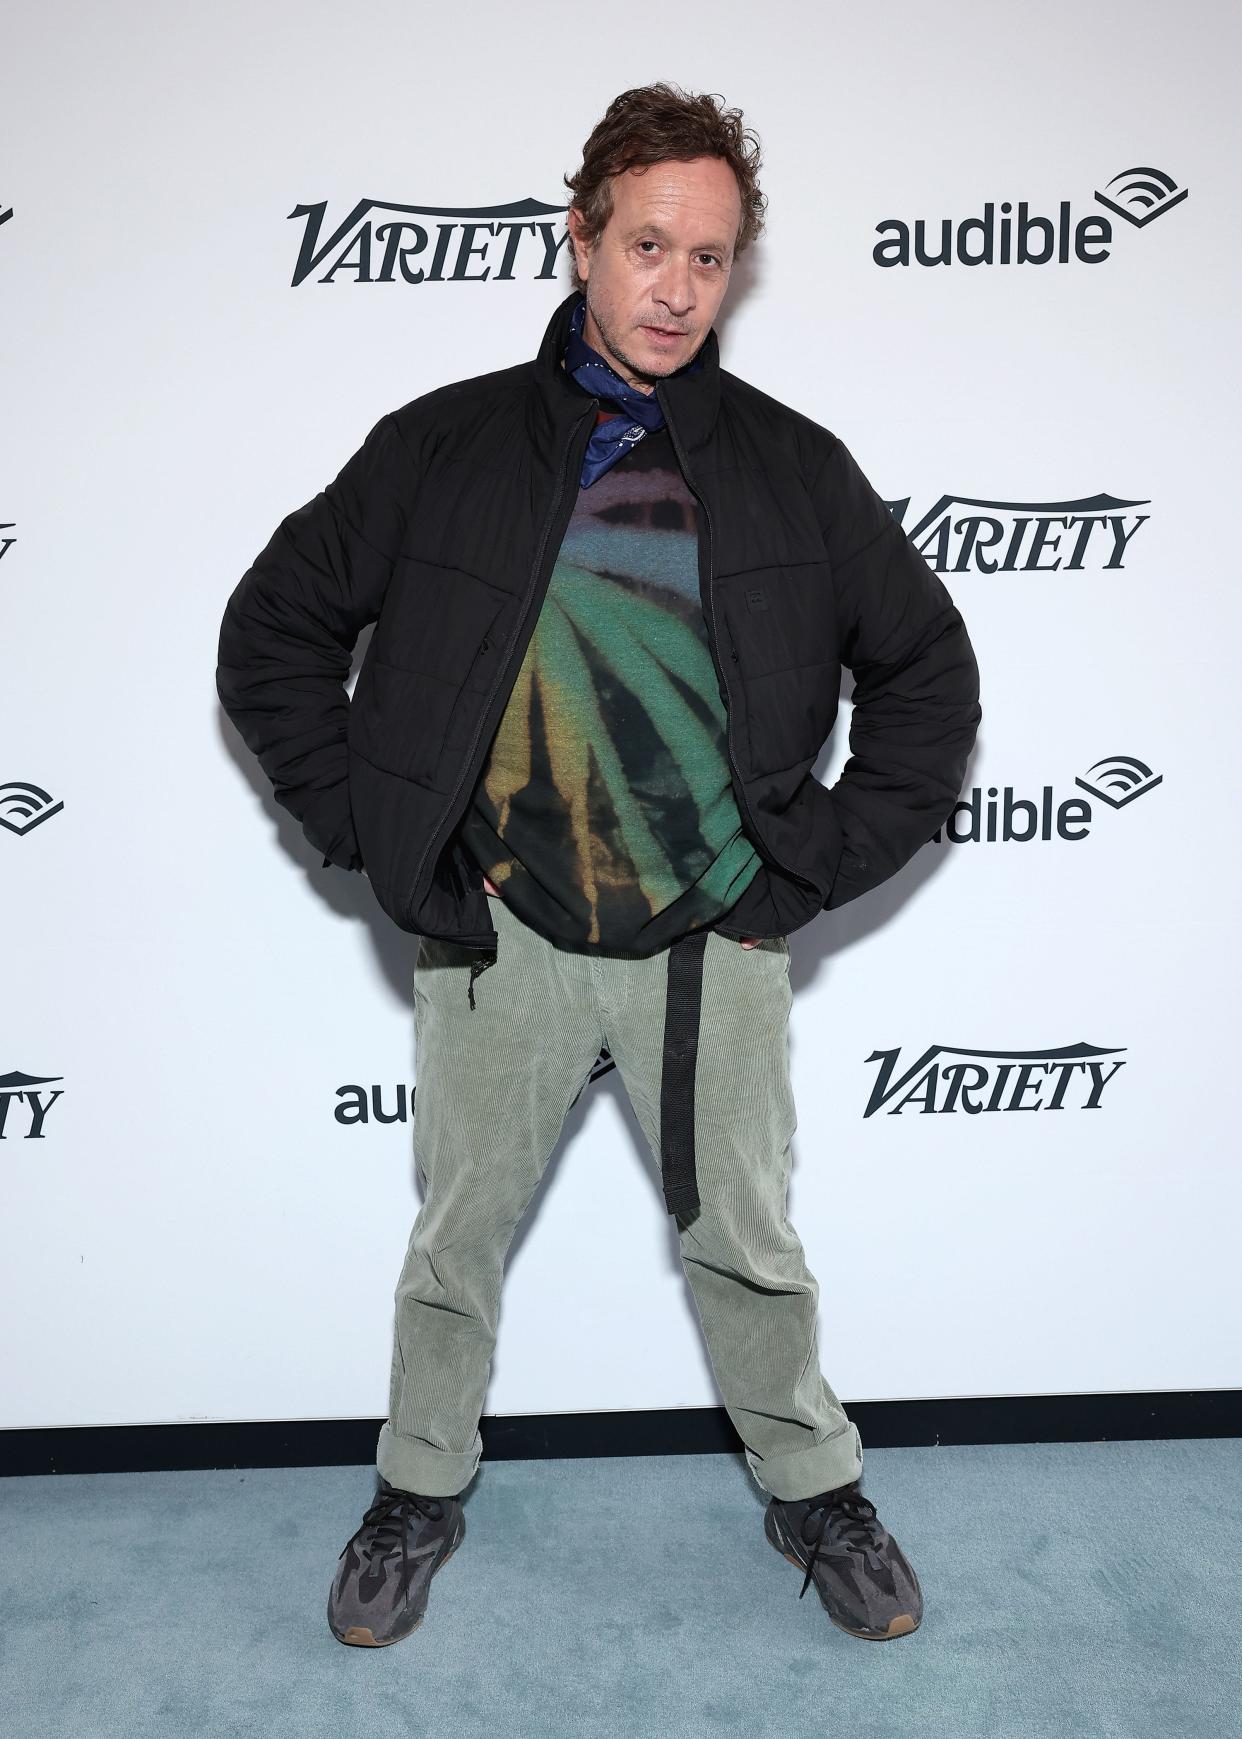 Pauly Shore has been sued on charges of battery and assault following an alleged attack at The Comedy Store club in November 2022.